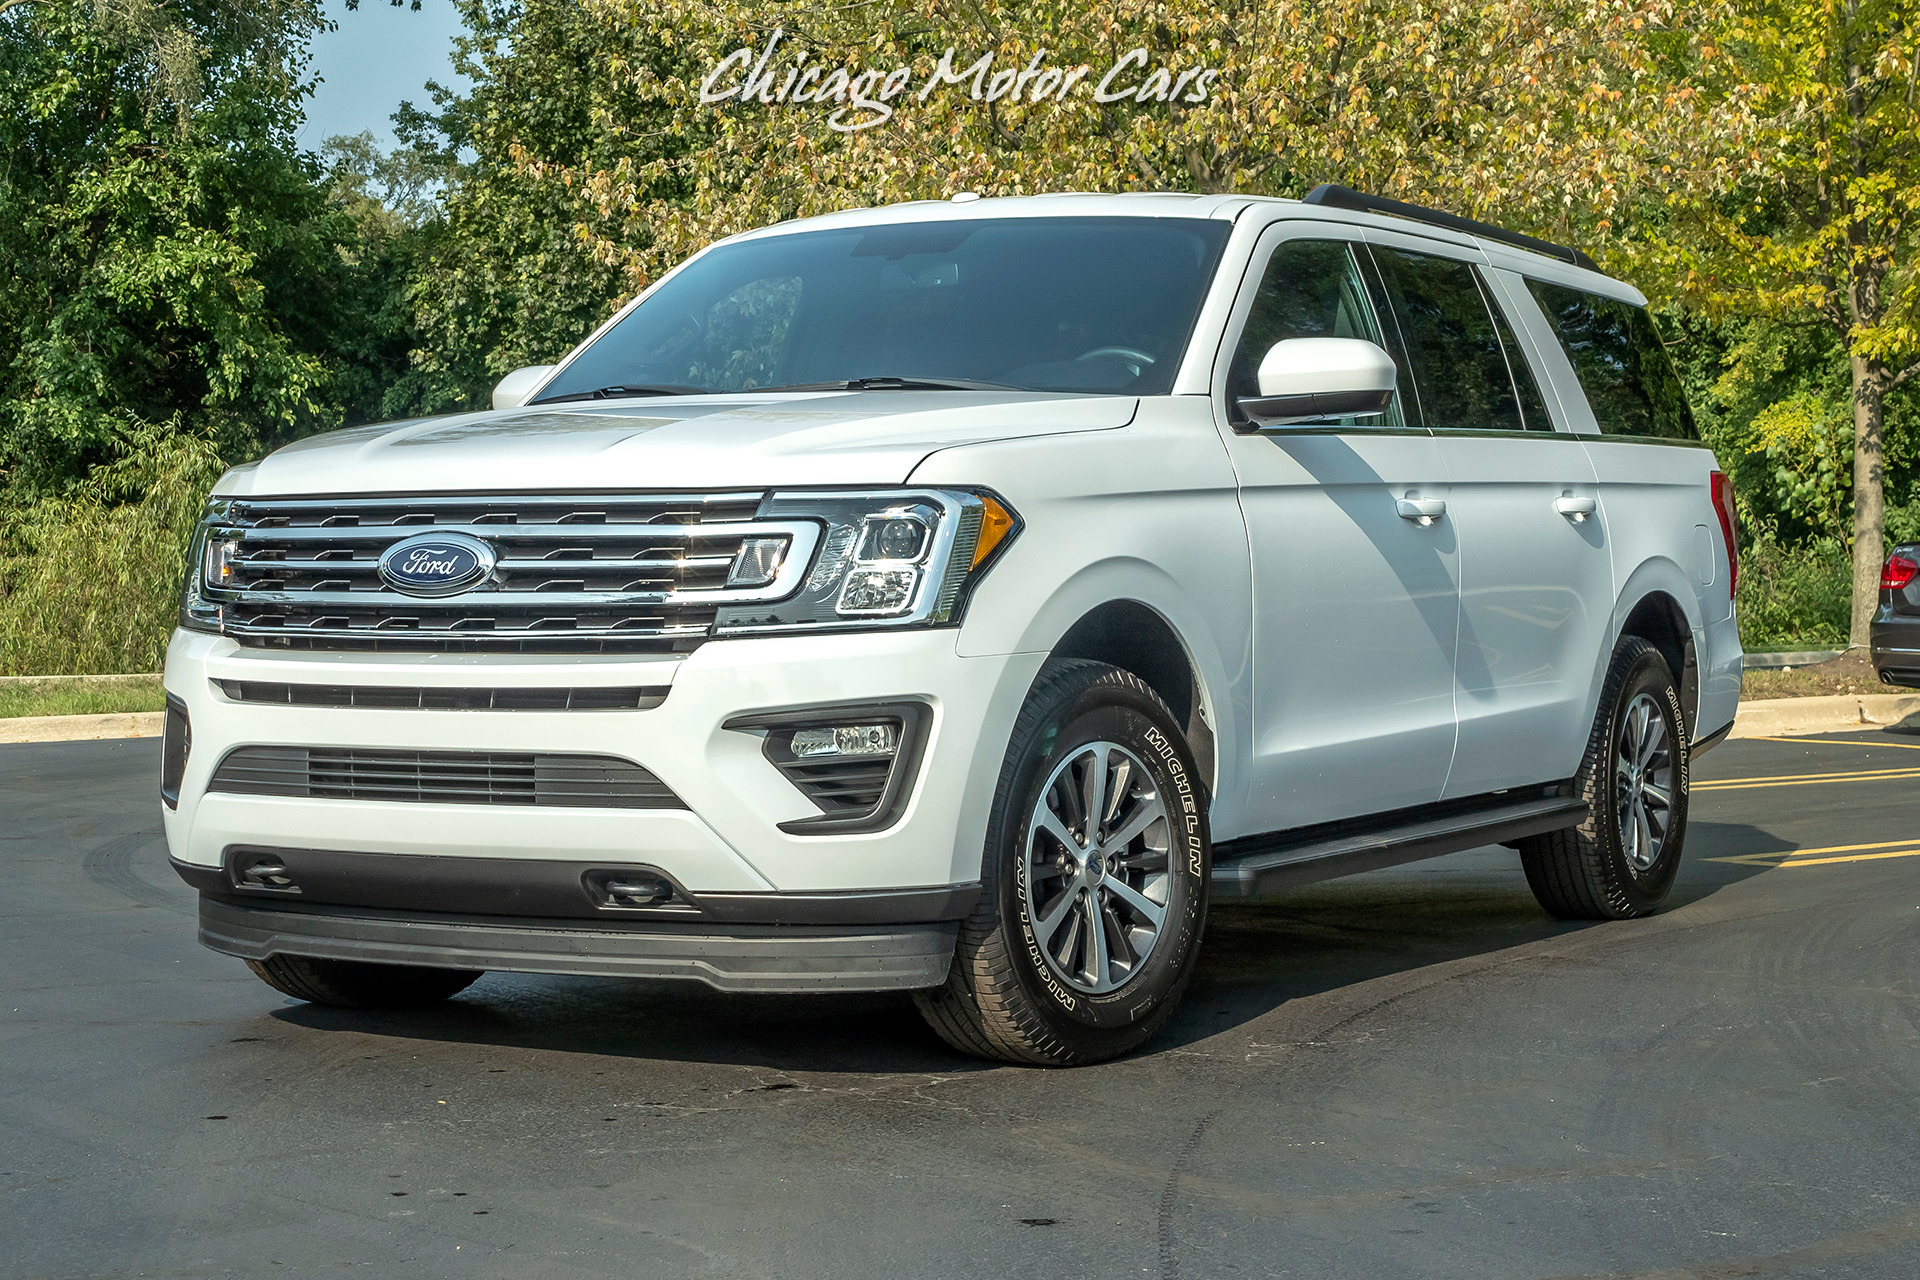 Used-2019-Ford-Expedition-MAX-XLT-4X4-59kMSRP